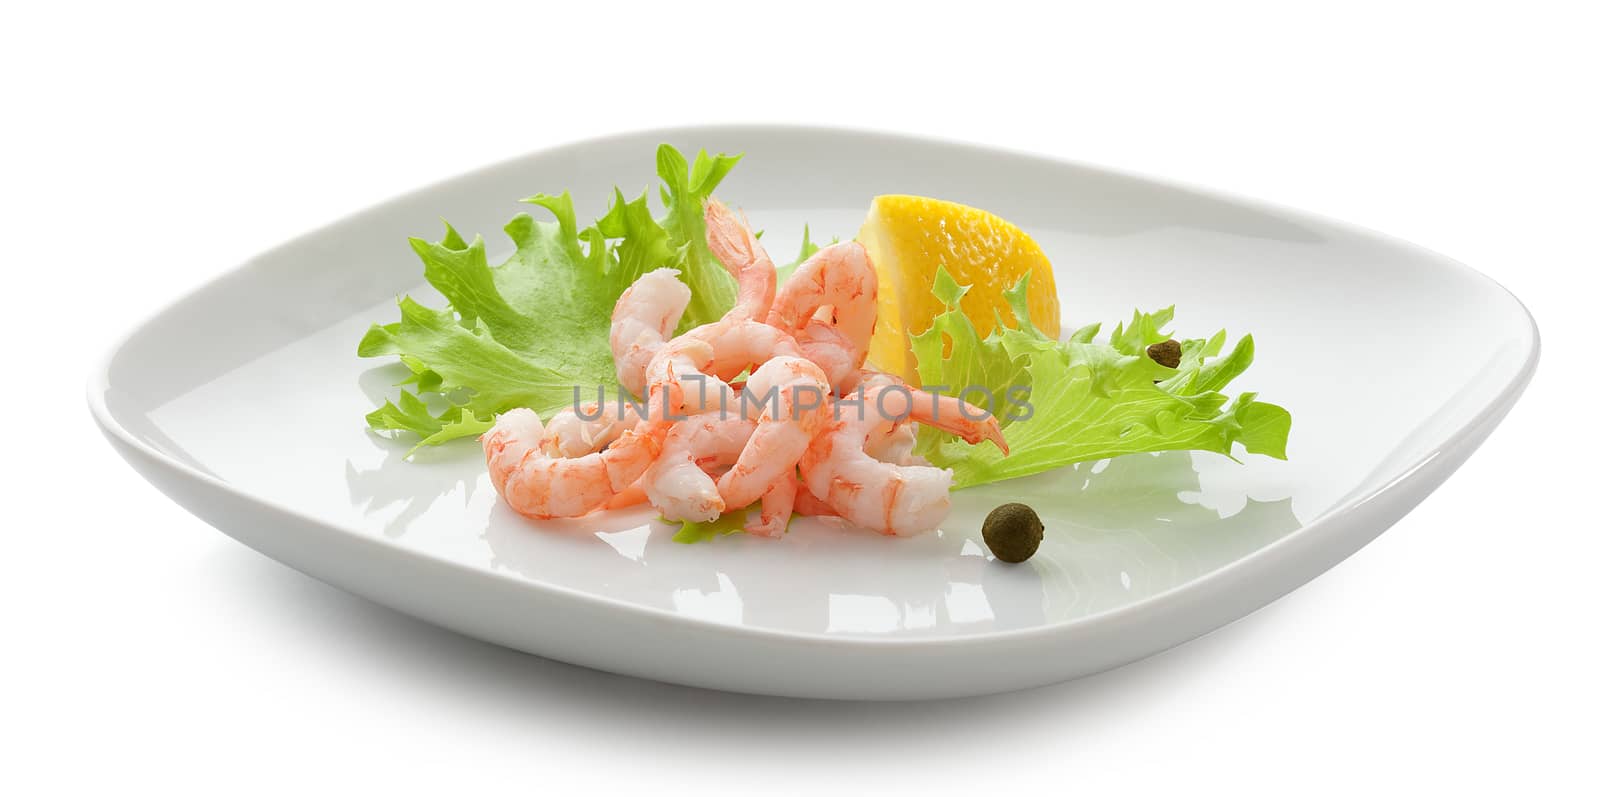 Shrimps on the plate by Angorius